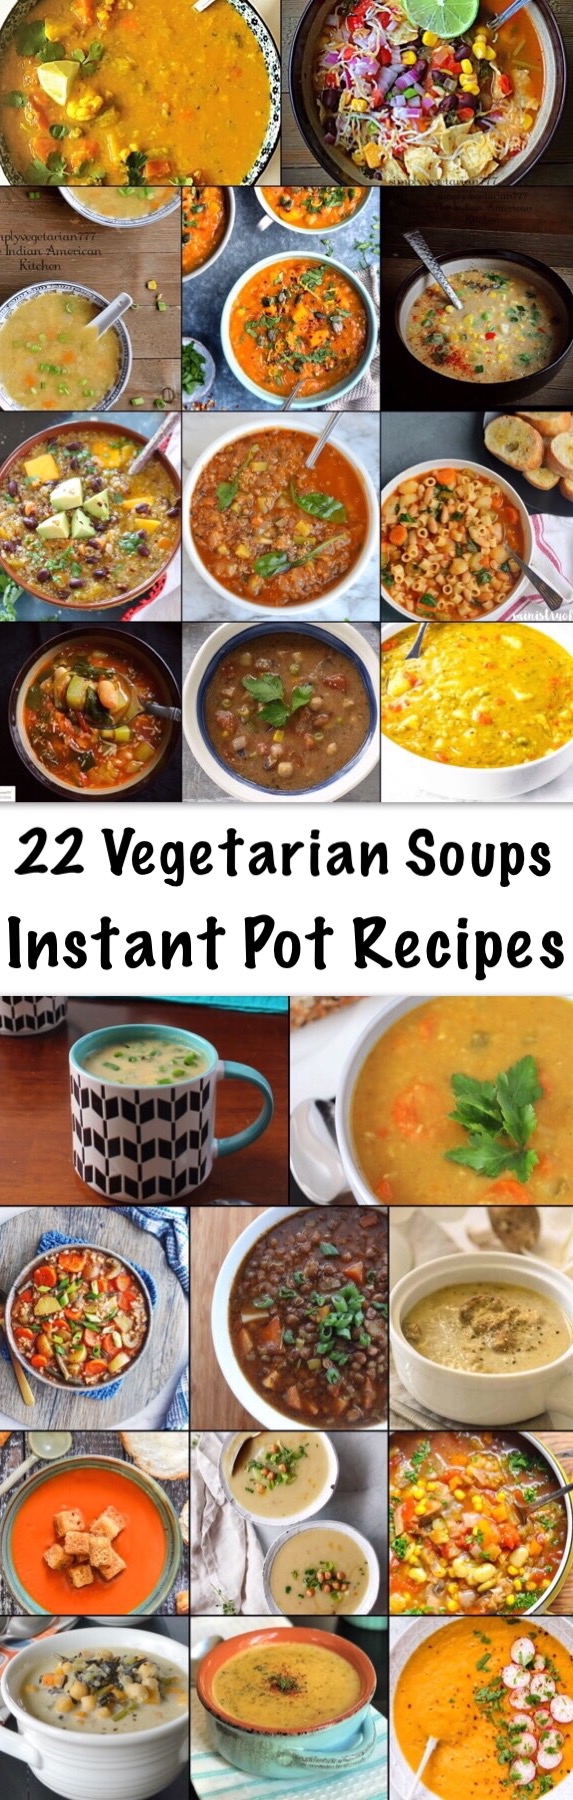 A collection of 22 Vegetarian Soups Instant Pot Recipes is yum, doable and worth bookmarking + sharing. Combat the Colder days with some heartwarming soups. #instantpotrecipes #instantpotvegetarian #instantpotsoups 